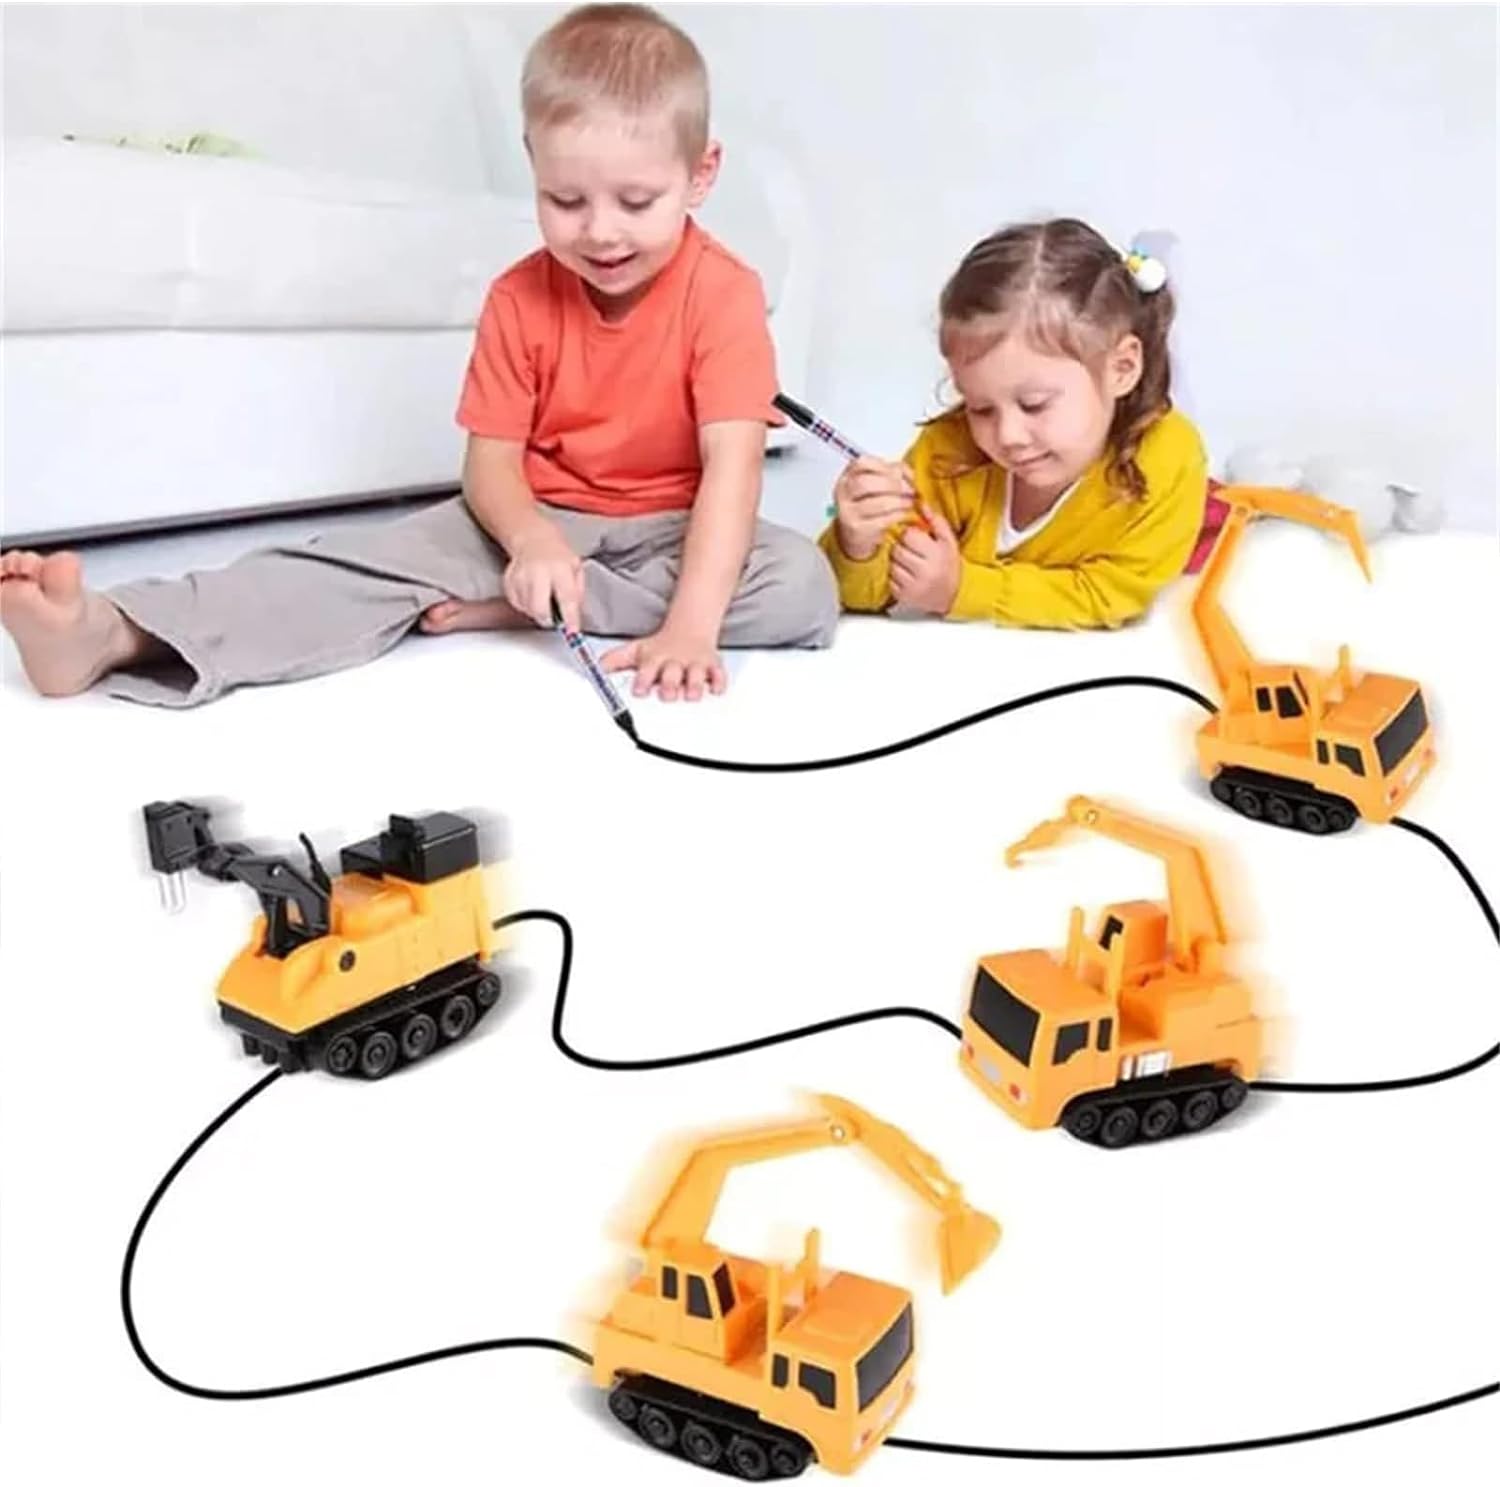 Trace racer inductive toy